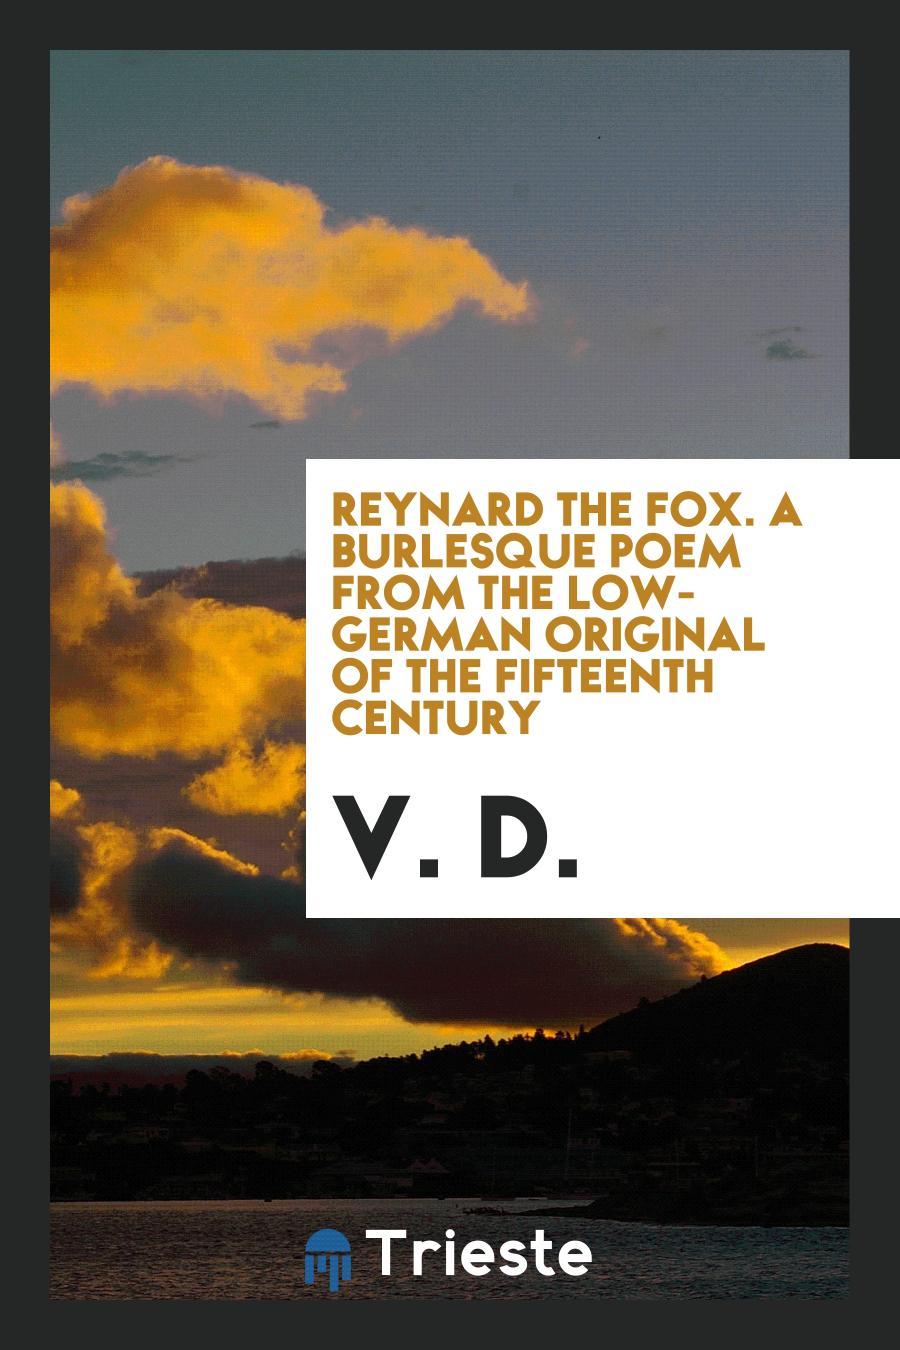 V. D. - Reynard the Fox. A burlesque poem from the Low-German original of the fifteenth century